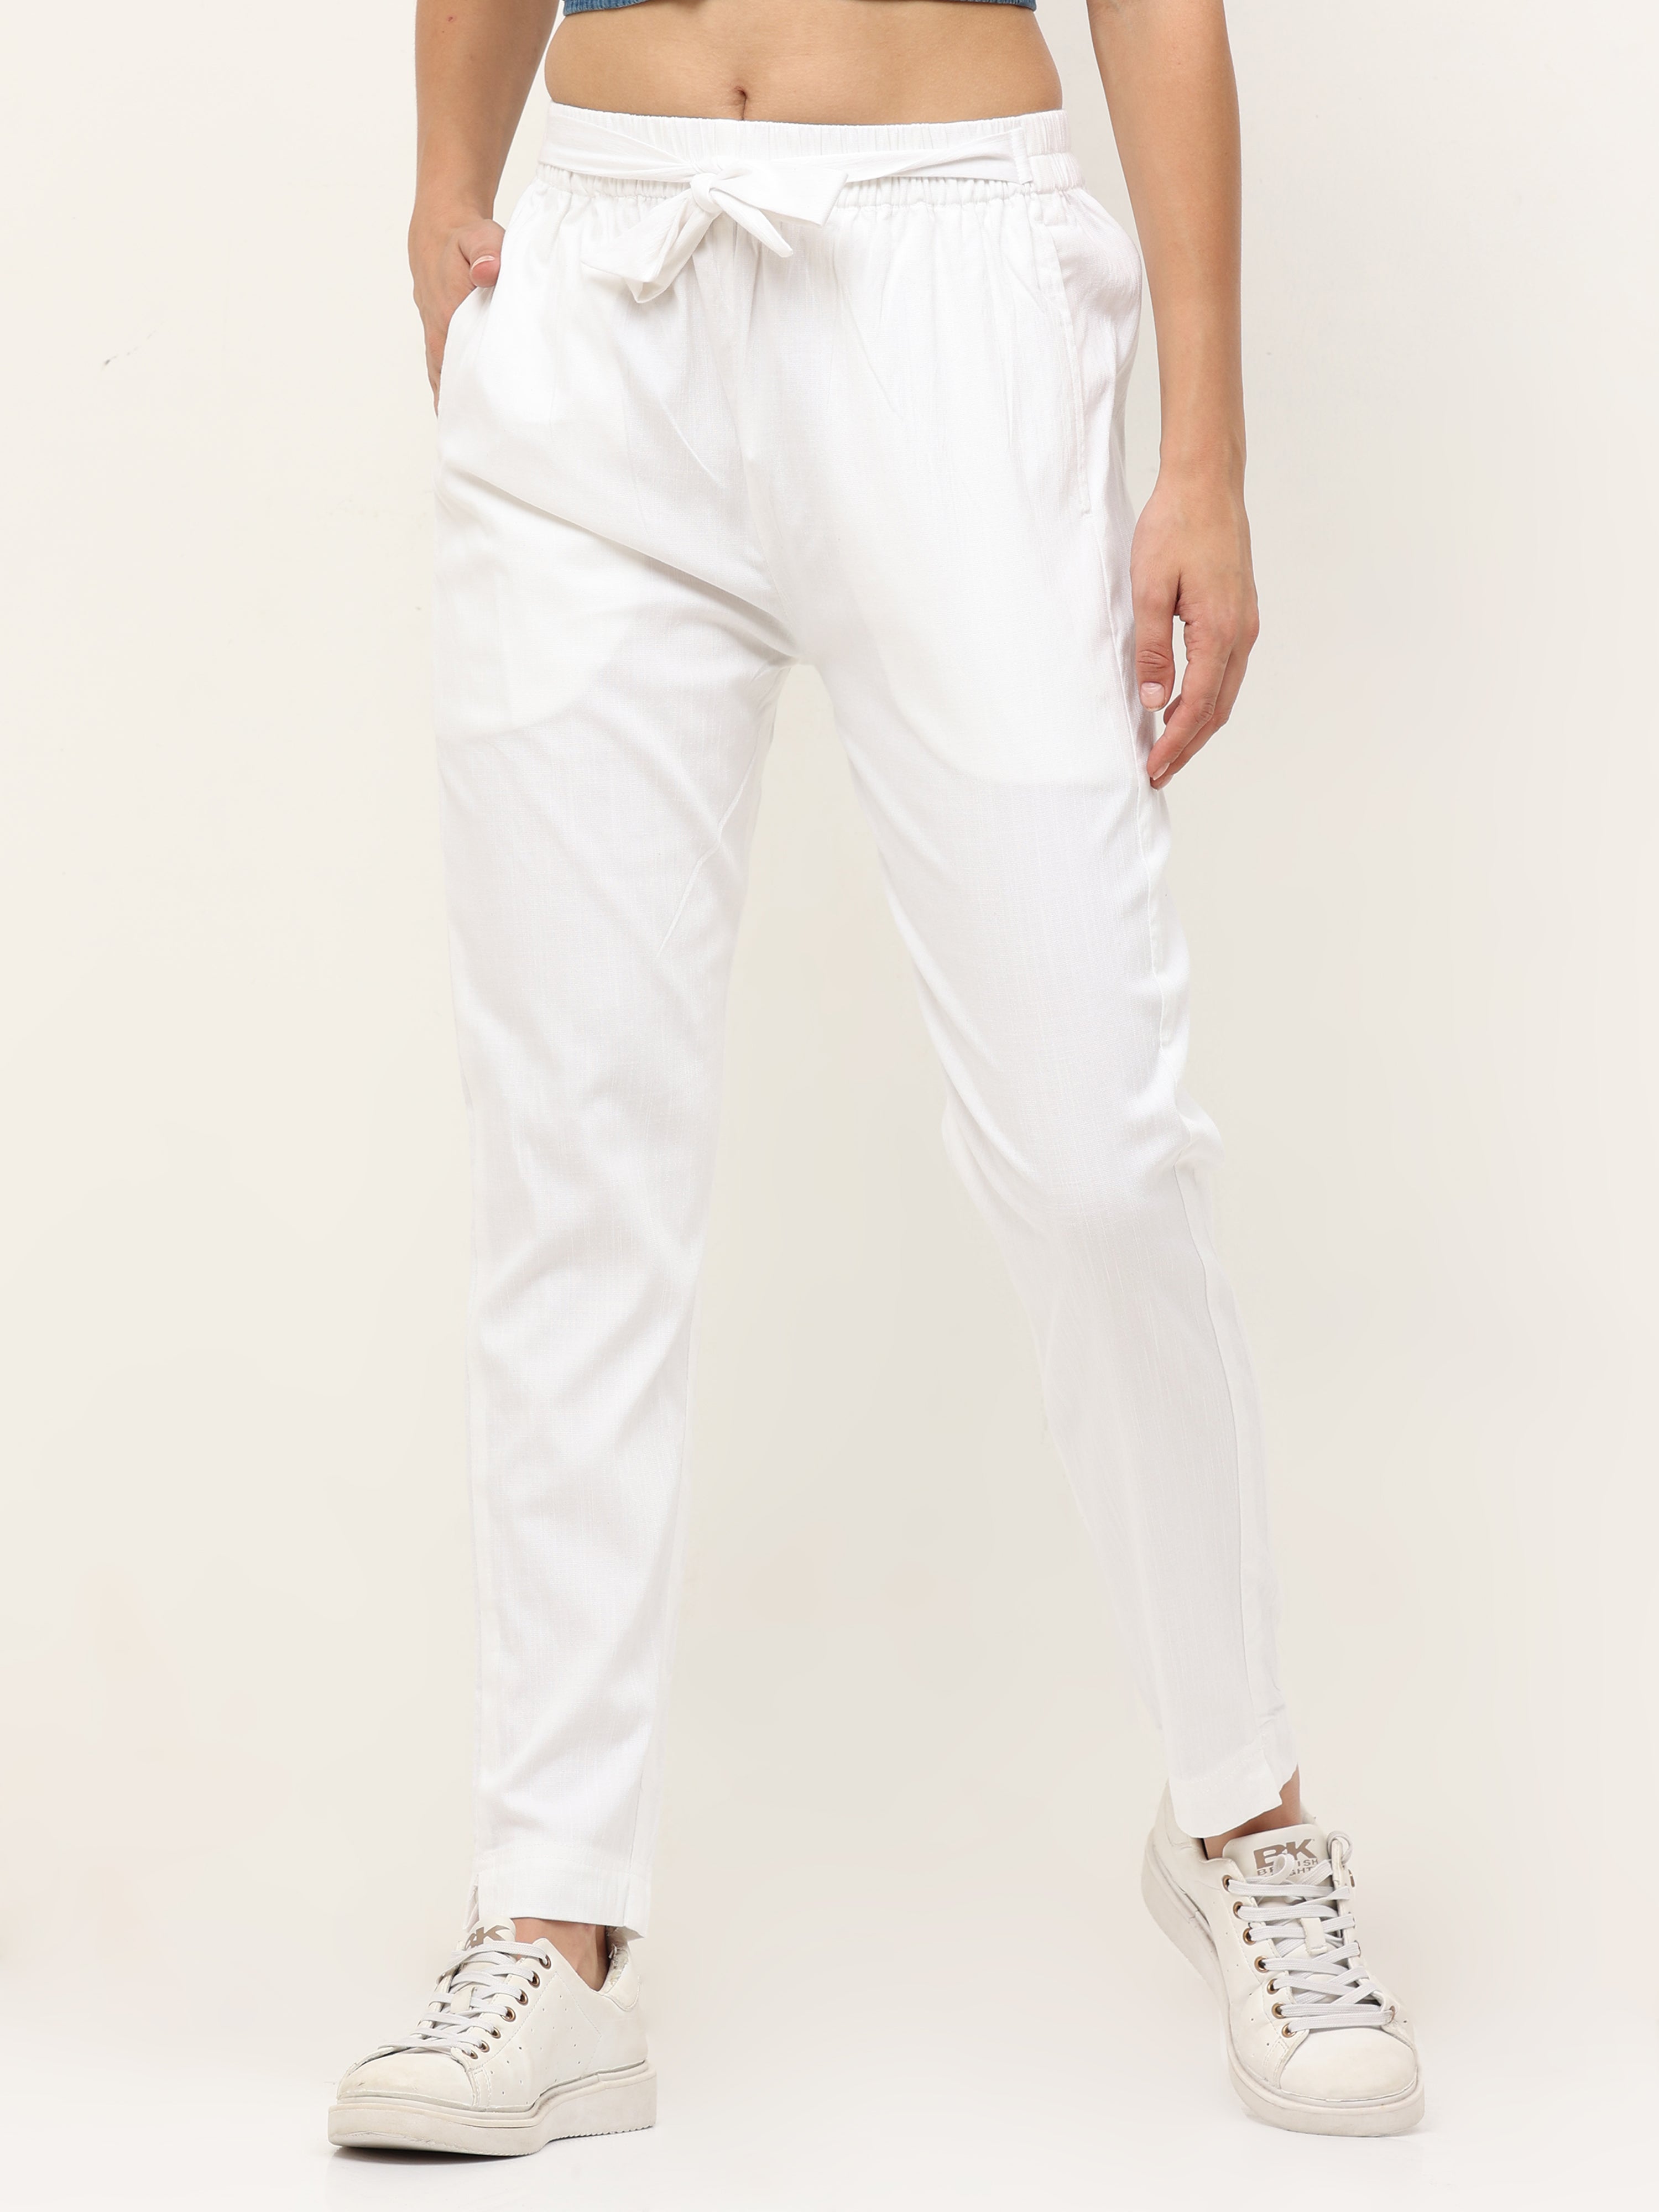 Buy Go Colors Silver Slim Fit Pencil Pants from top Brands at Best Prices  Online in India  Tata CLiQ